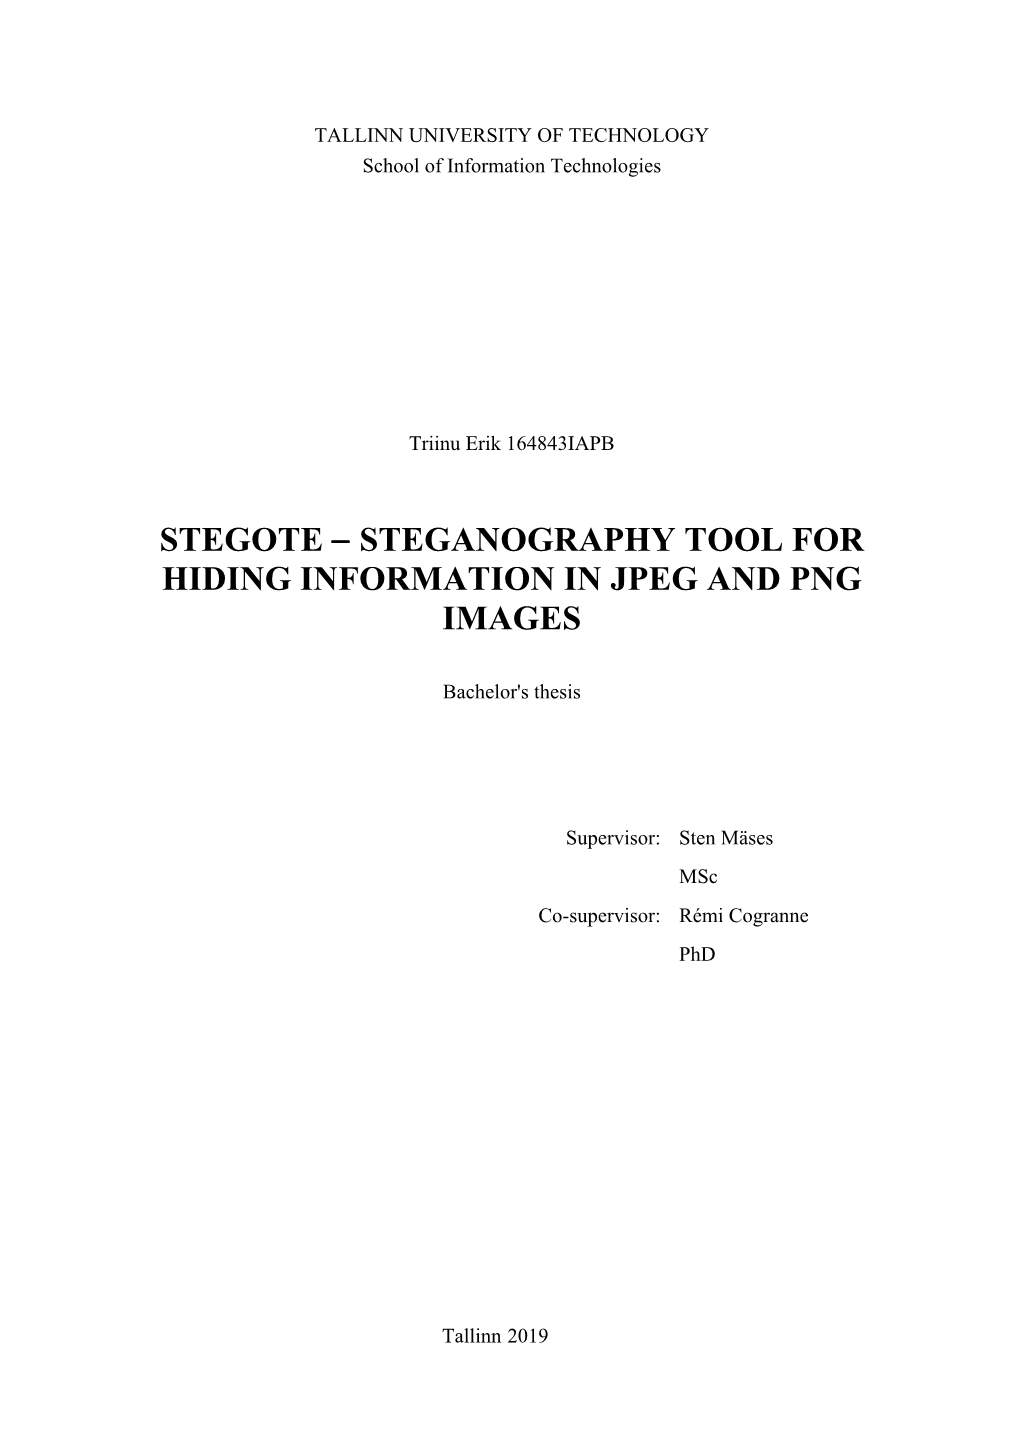 Stegote - Steganography Tool for Hiding Information in Jpeg and Png Images